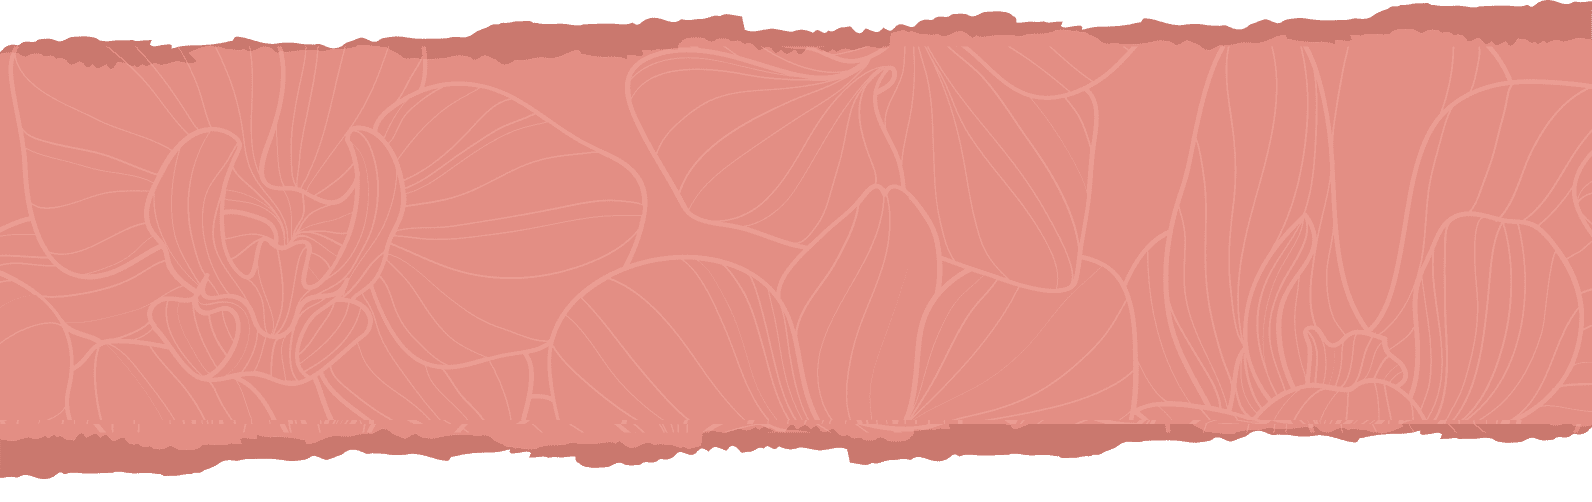 Decorative border with salmon colored island flowers and torn edges